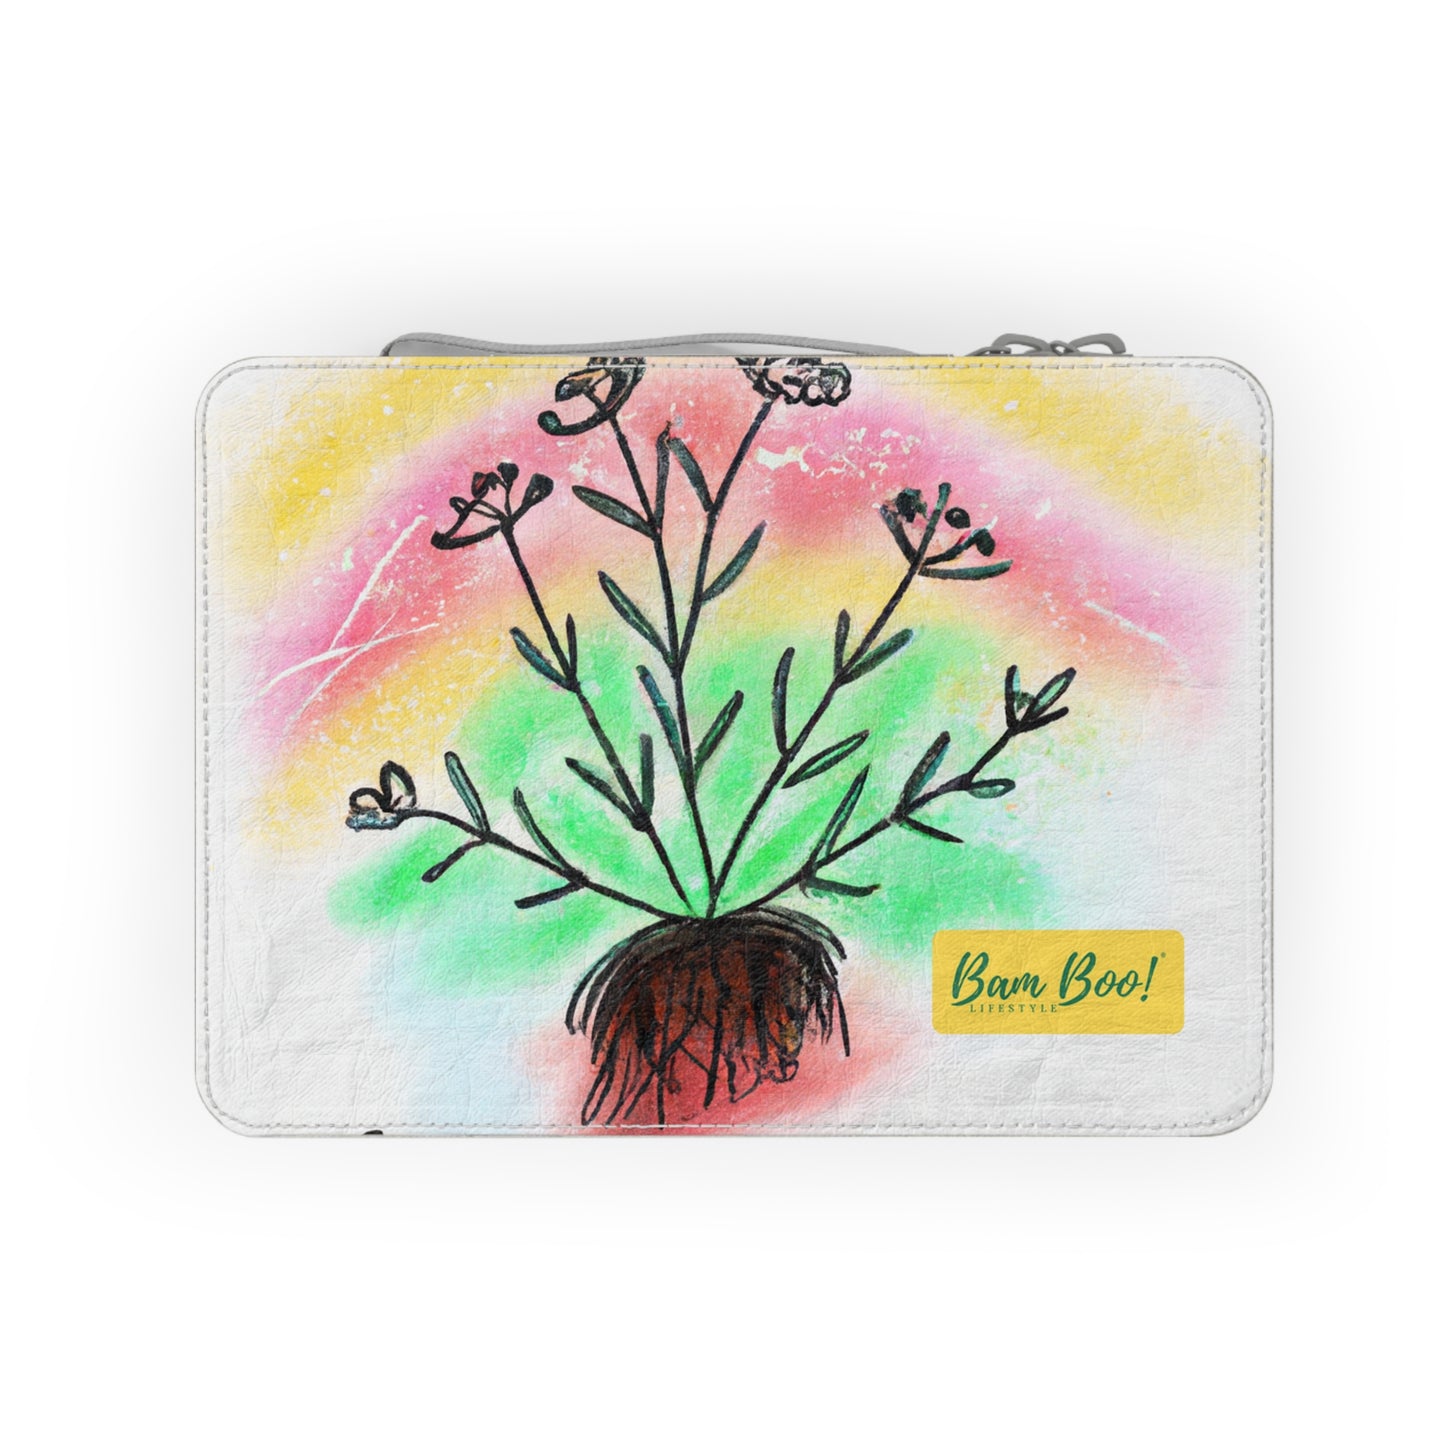 My Life in Art: An Emotional Journey - Bam Boo! Lifestyle Eco-friendly Paper Lunch Bag